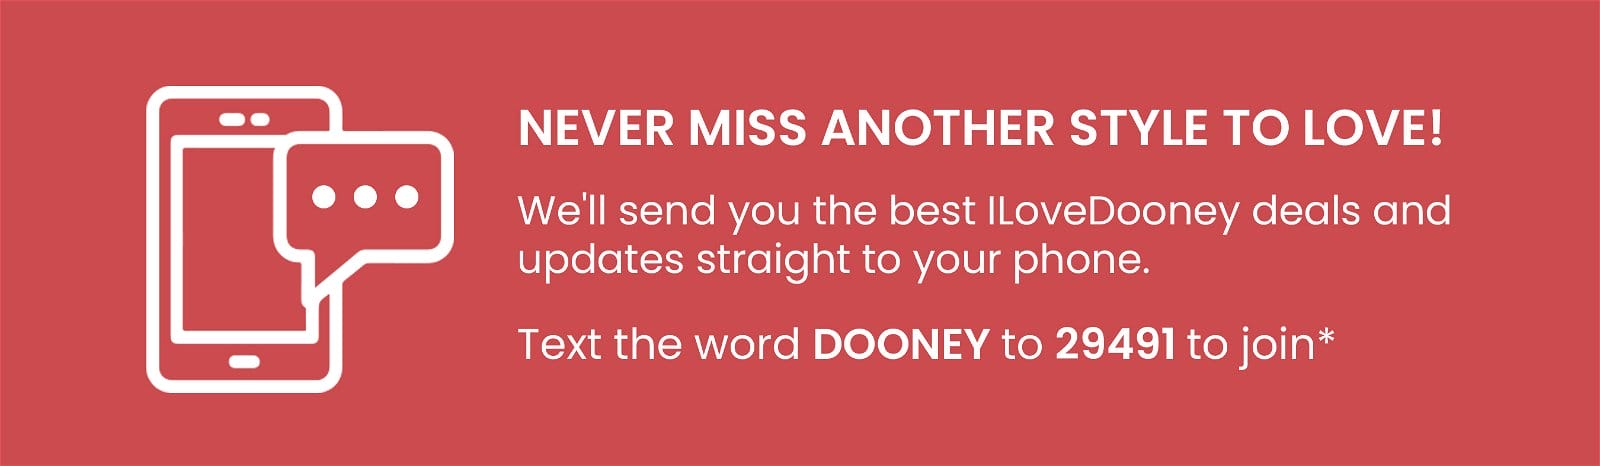 Never miss another style to love! We'll send you the best ILoveDooney deals and updates straight to your phone. Text the word DOONEY to 29491 to join*